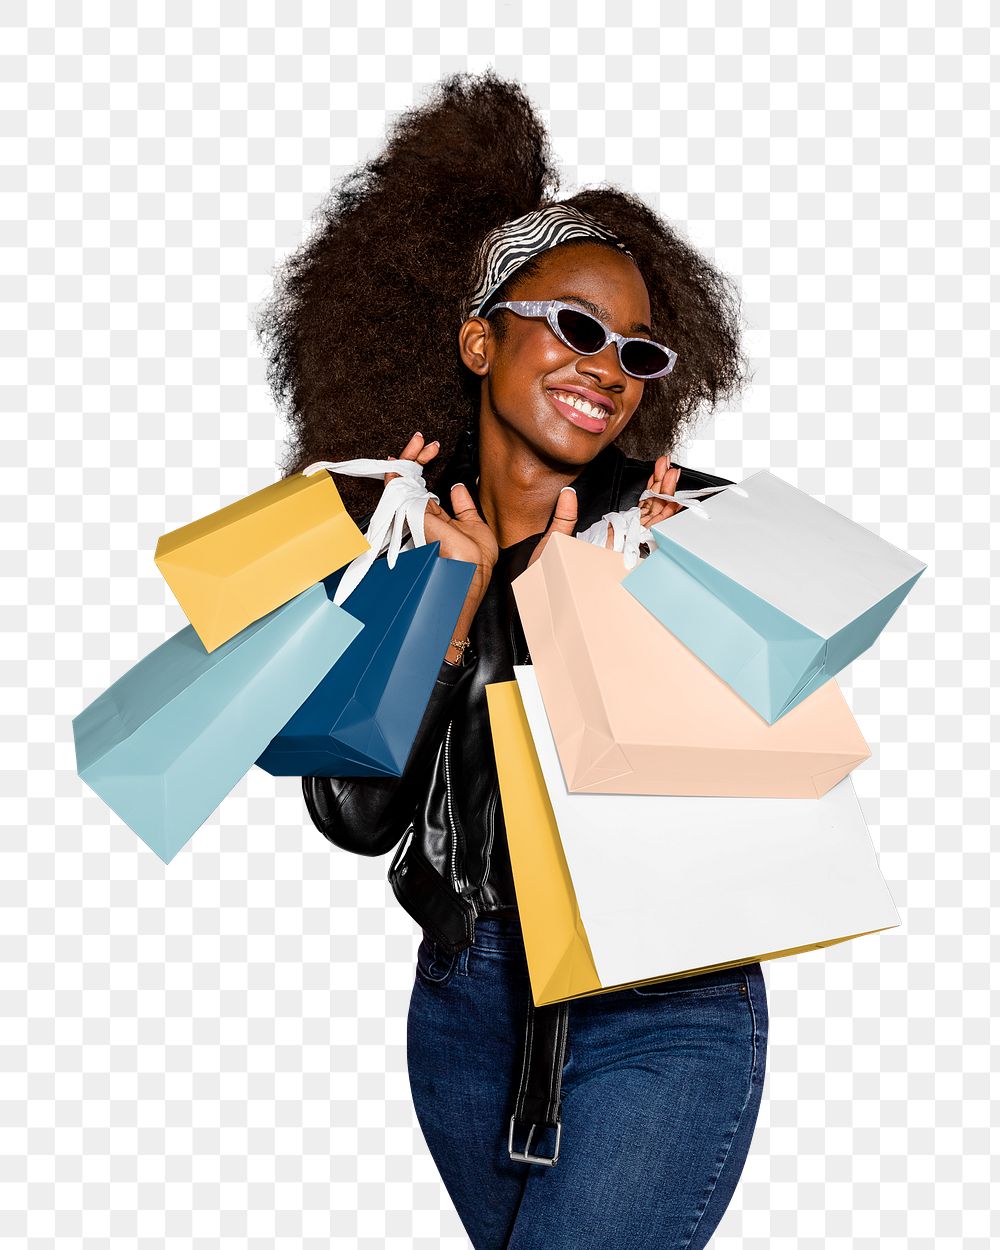 Woman shopping png sticker, transparent background